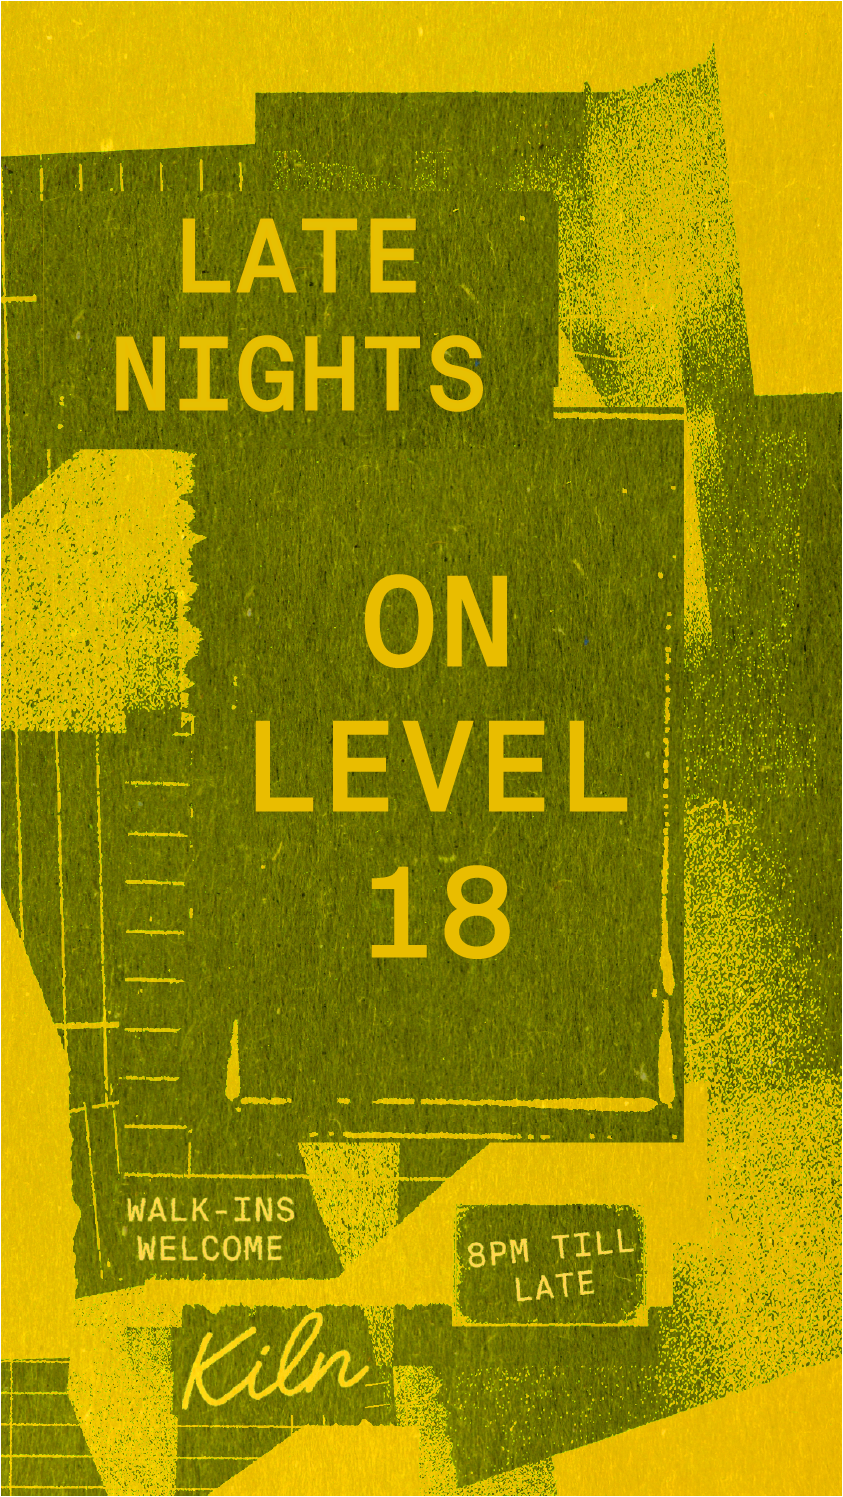 Late Nights on Level 18 - 8pm